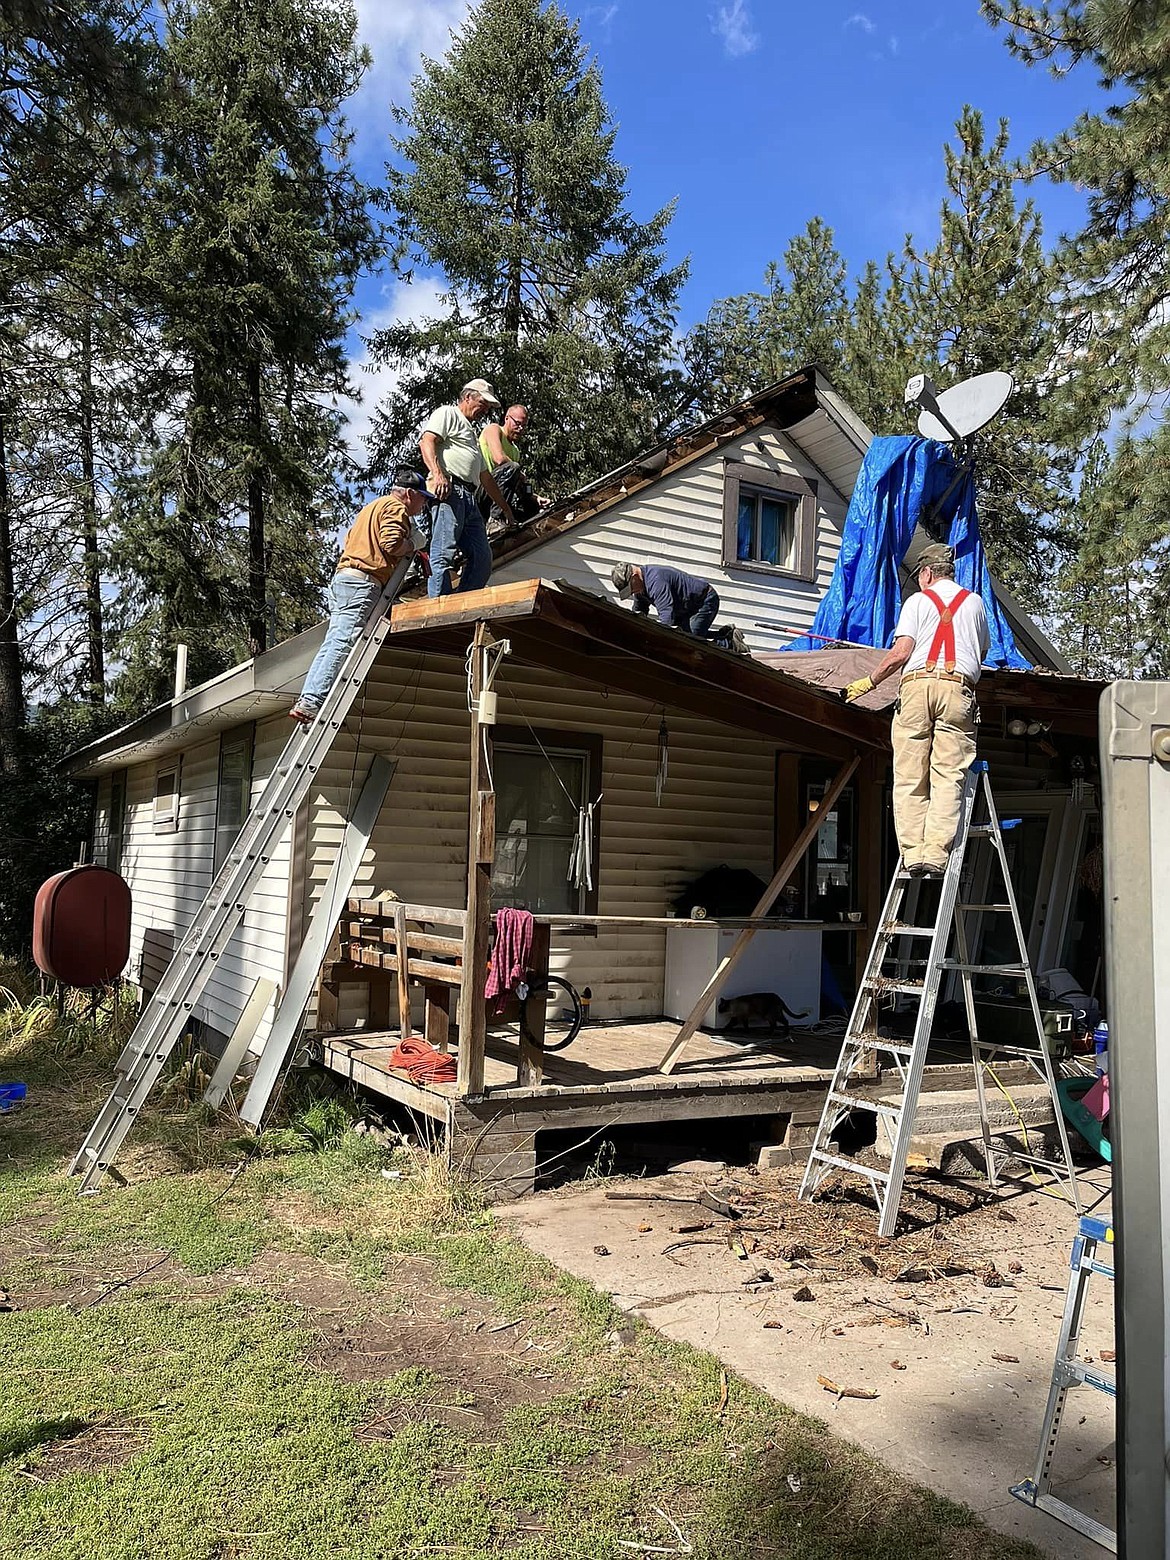 A group of volunteers from New Day Fellowship in St. Regis made up the work crew that was led by local contractor Terry Messenbrink. From left, Pastor Morris Hill on the ladder, Russell Cleveland, Shawn Yount and Scott Burrows on the other ladder. (Photo provided)